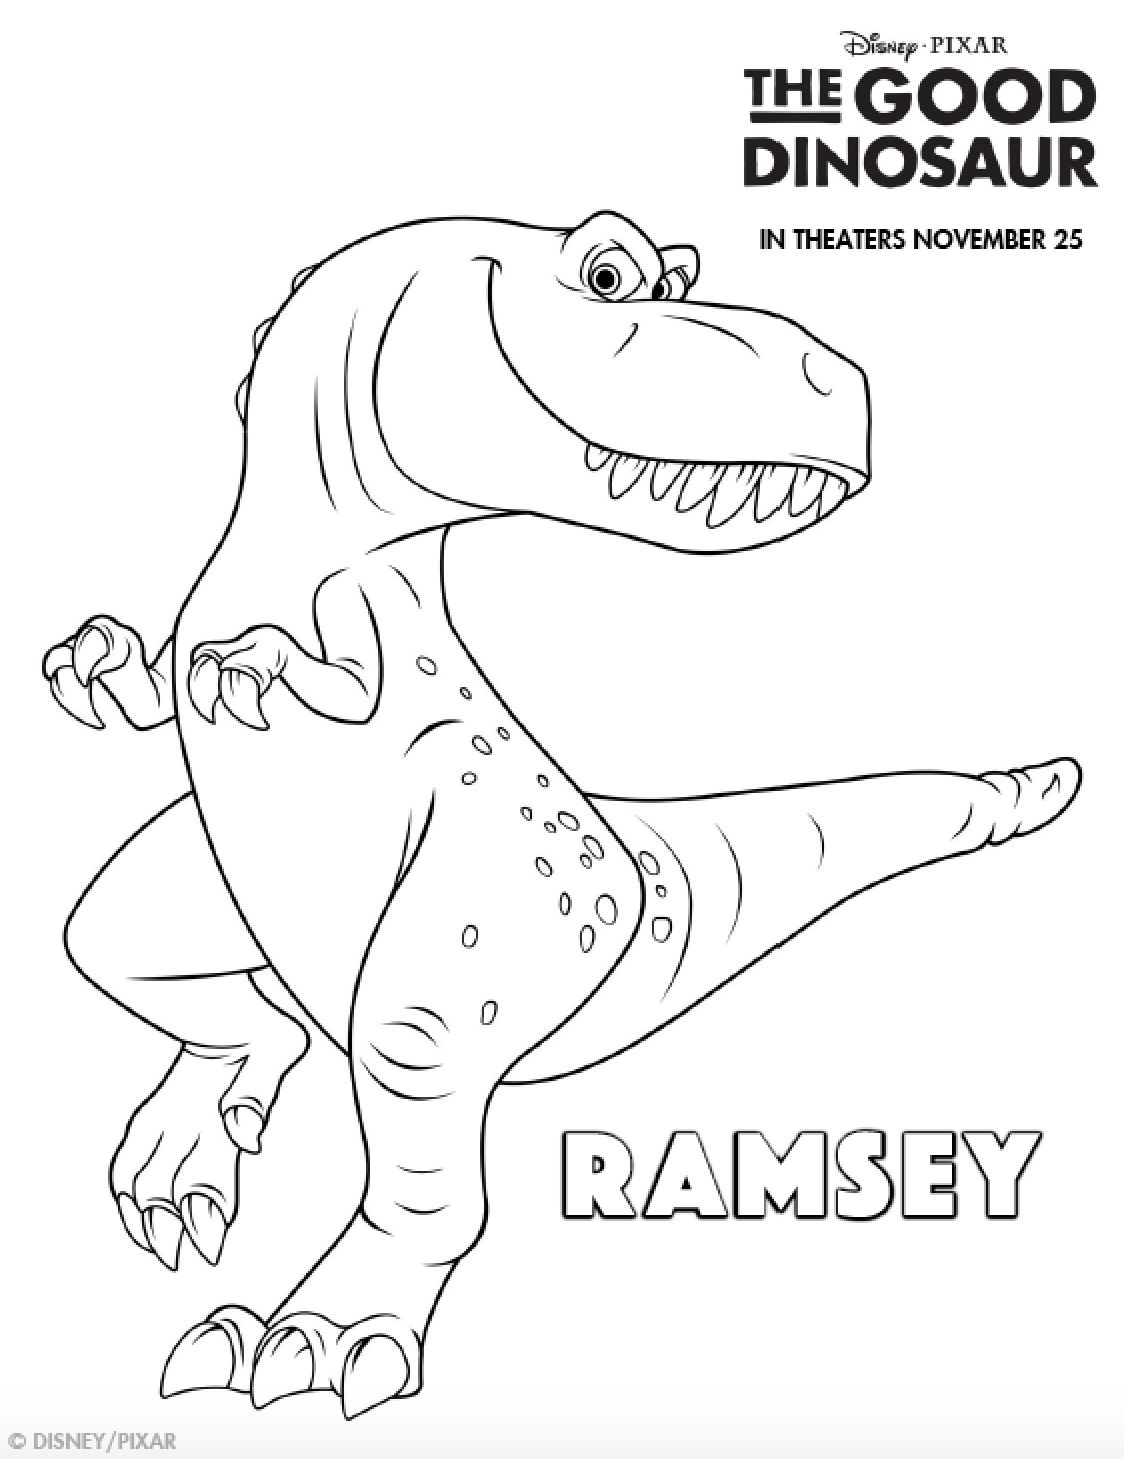 The Good Dinosaur Coloring Pages - Have fun with your children with these fun printable The Good Dinosaur Coloring Pages.